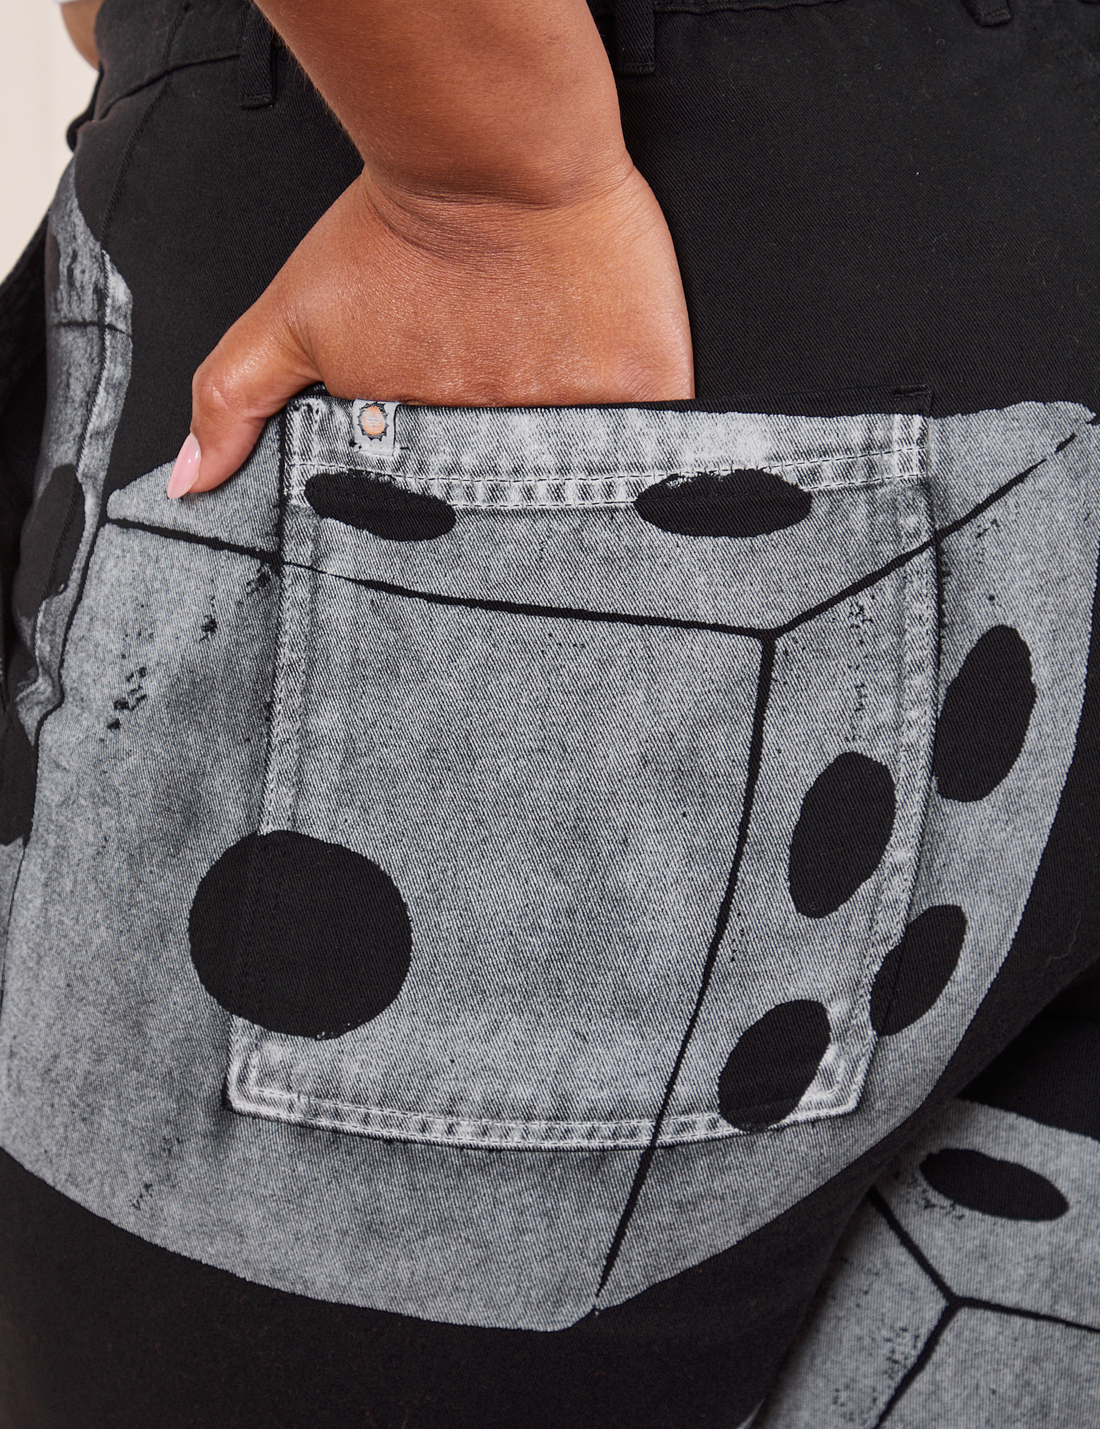 Back pocket close up of Icon Work Pants in Dice. Morgan has her hand in he pocket.